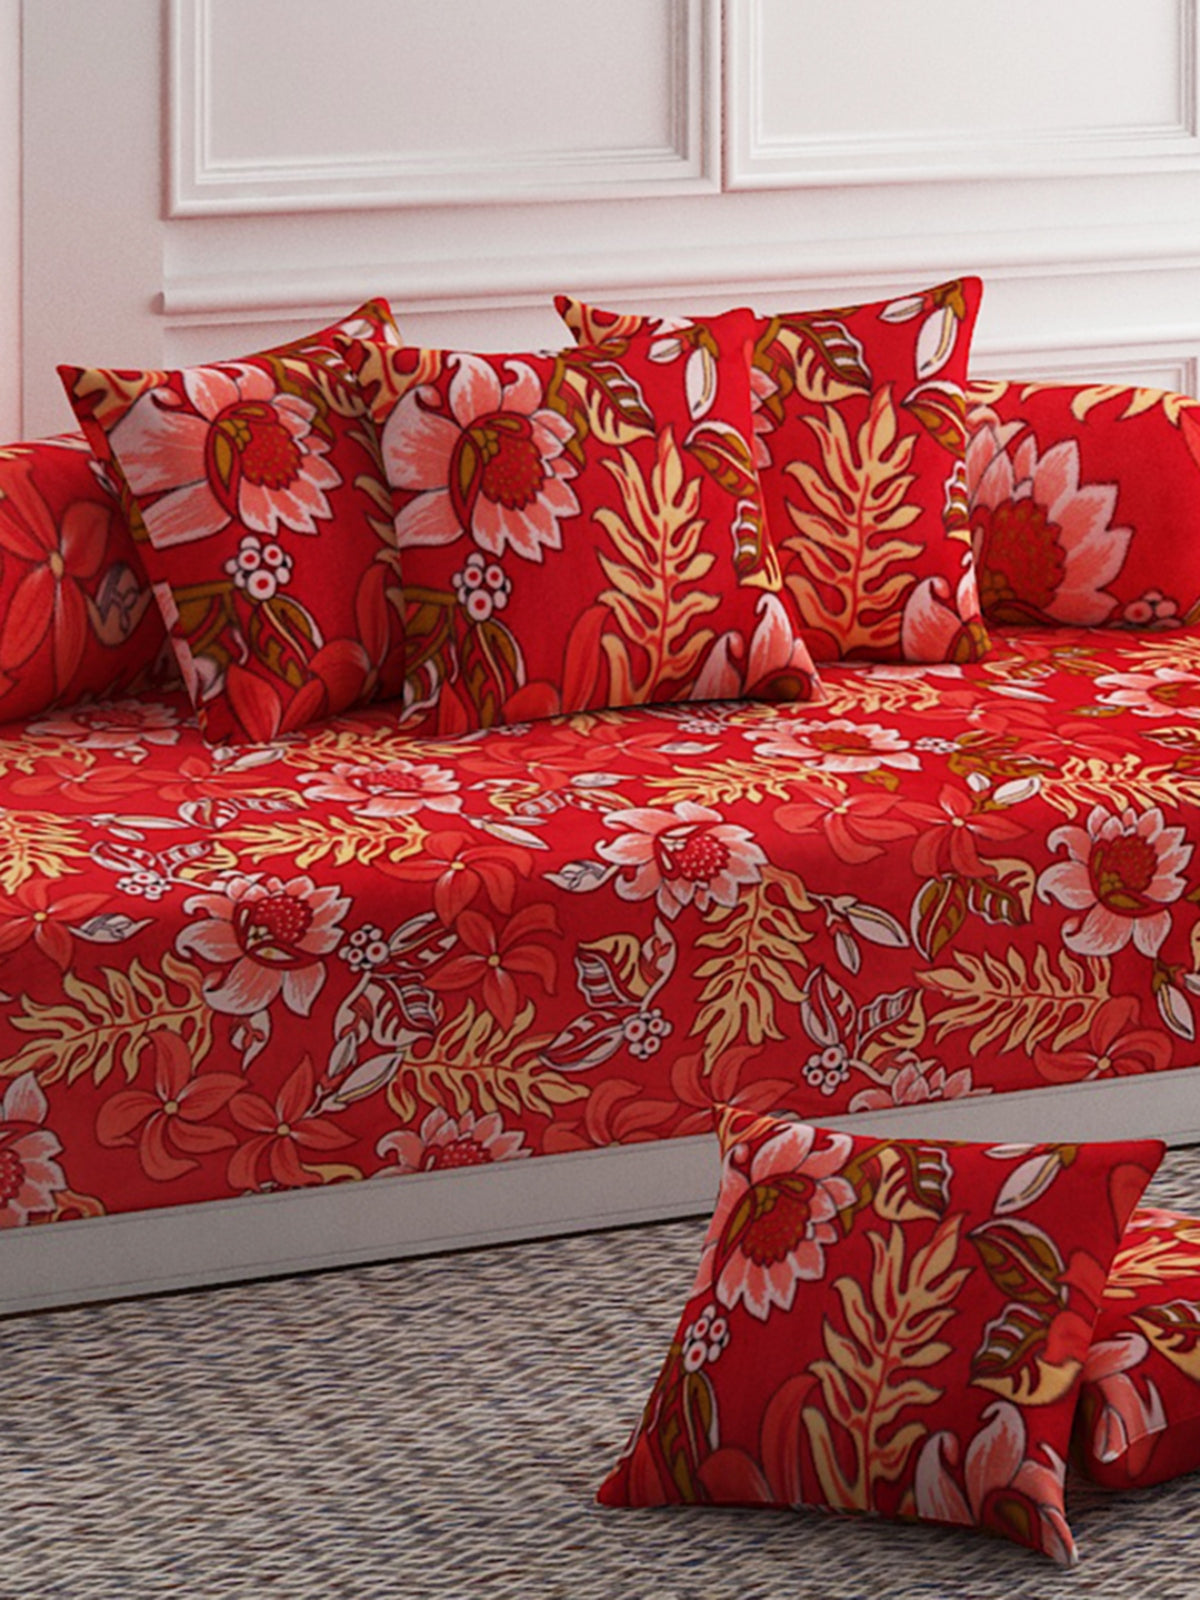 Floral Printed Diwan Set with Bolster and Cushion Covers - Red